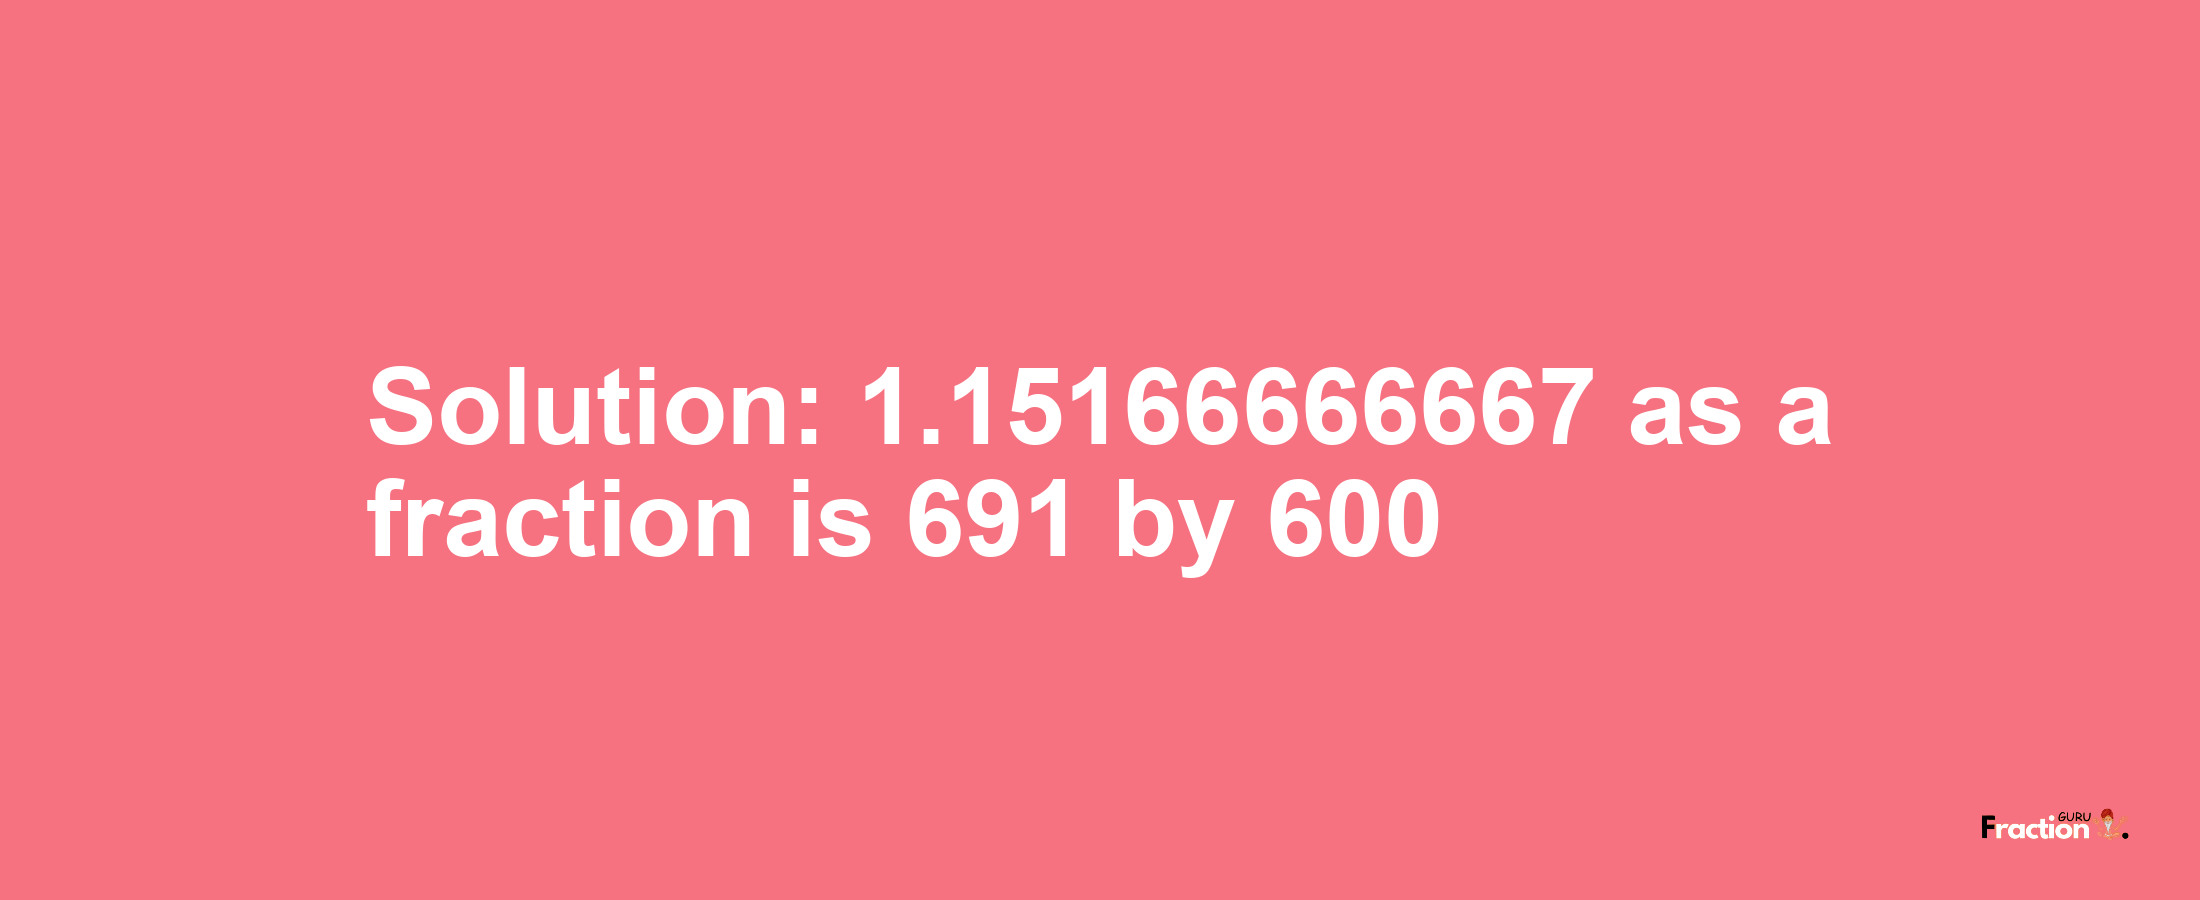 Solution:1.15166666667 as a fraction is 691/600